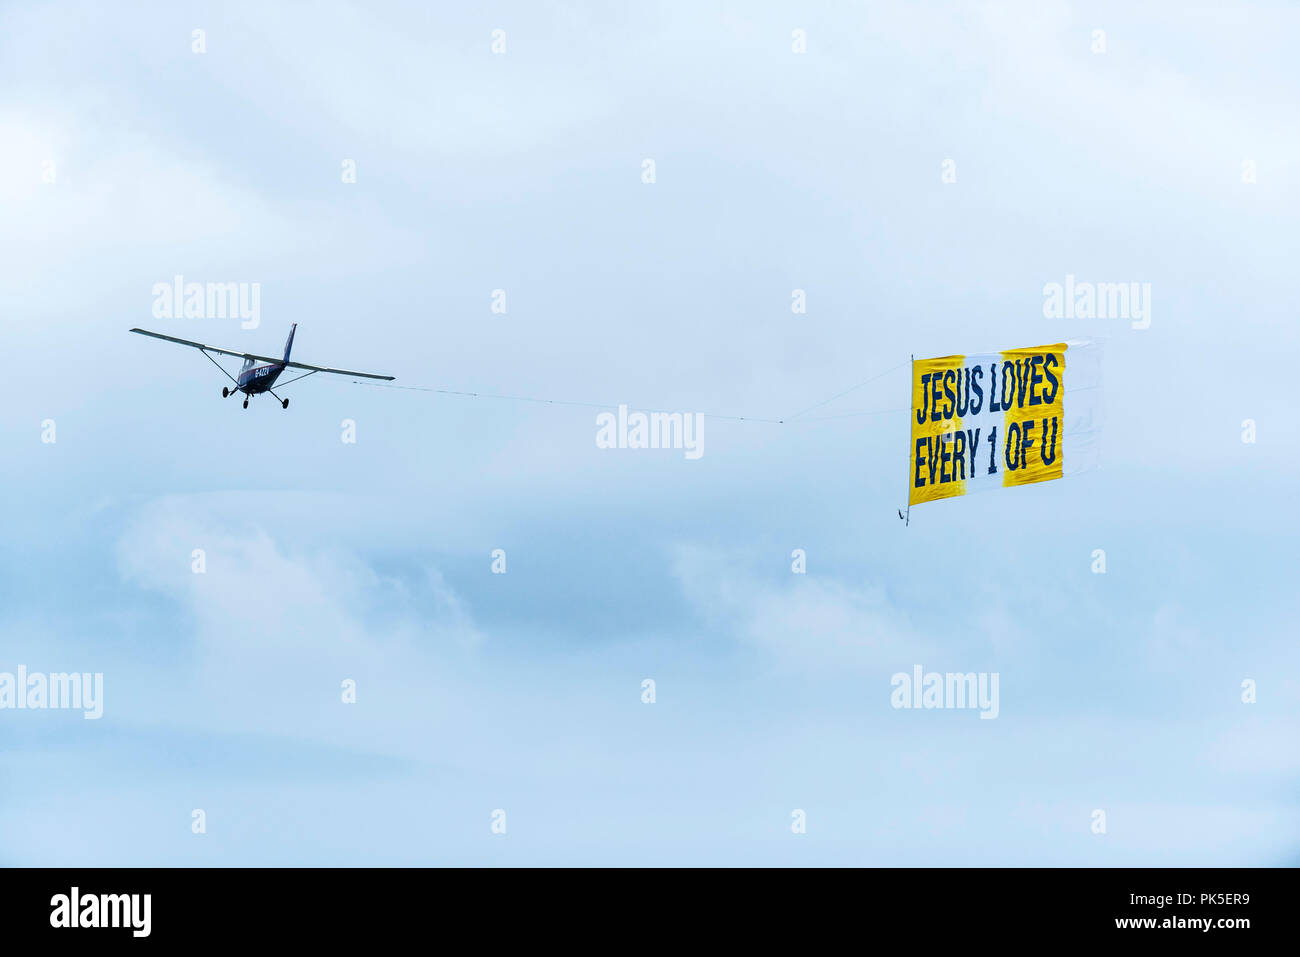 A small aeroplane towing a banner with a religious message. Stock Photo